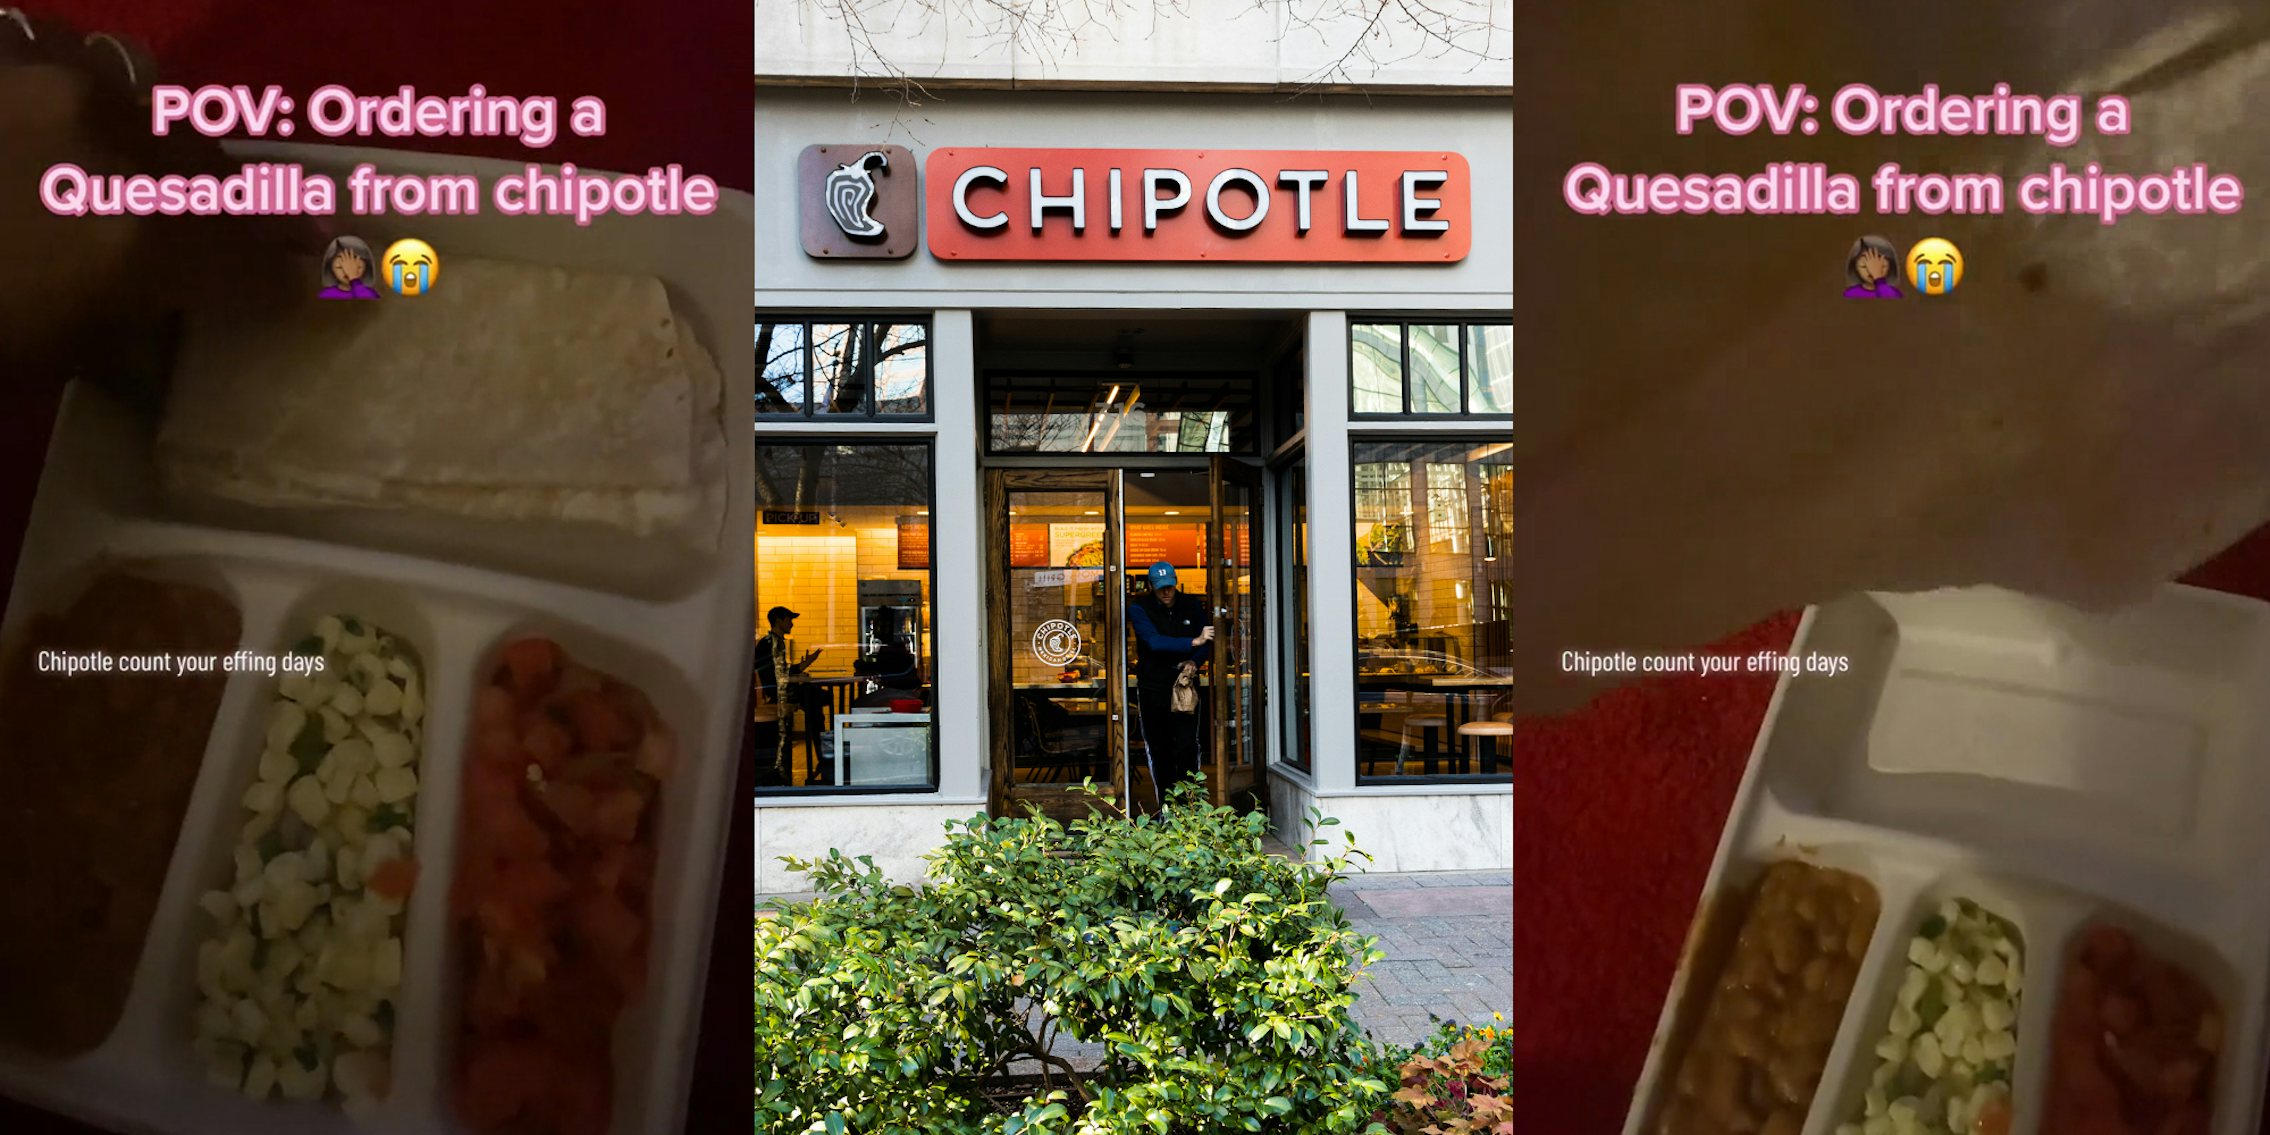 Chipotle food in tray with caption 'POV: Ordering a Quesadilla from chipotle' 'Chipotle count your effing days' (l) Chipotle building with sign (c) Chipotle food in tray and quesadilla being held above with caption 'POV: Ordering a Quesadilla from chipotle' 'Chipotle count your effing days' (r)